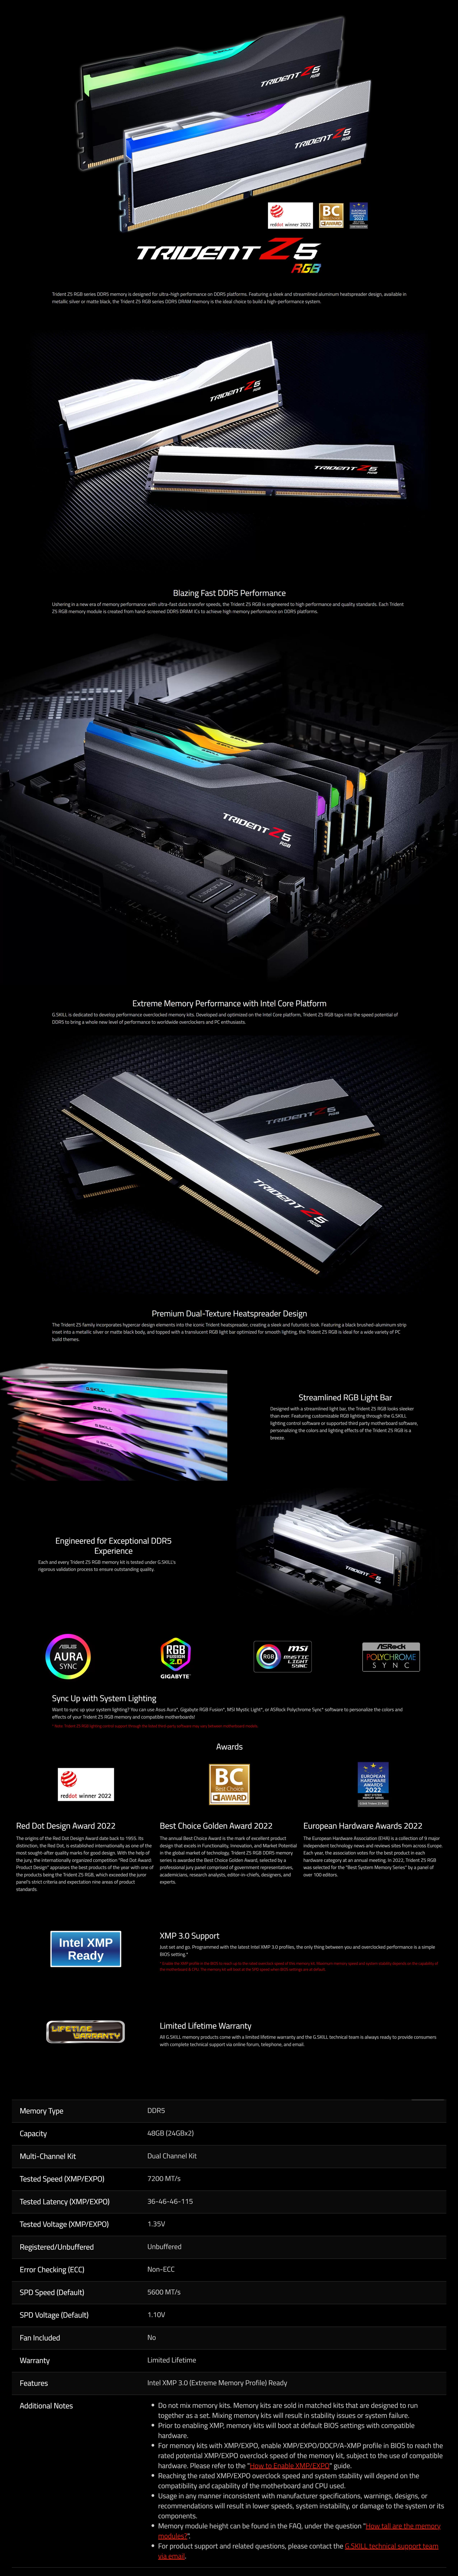 A large marketing image providing additional information about the product G.Skill 48GB Kit (2x24GB) DDR5 Trident Z5 RGB C36 7200MHz - Black - Additional alt info not provided